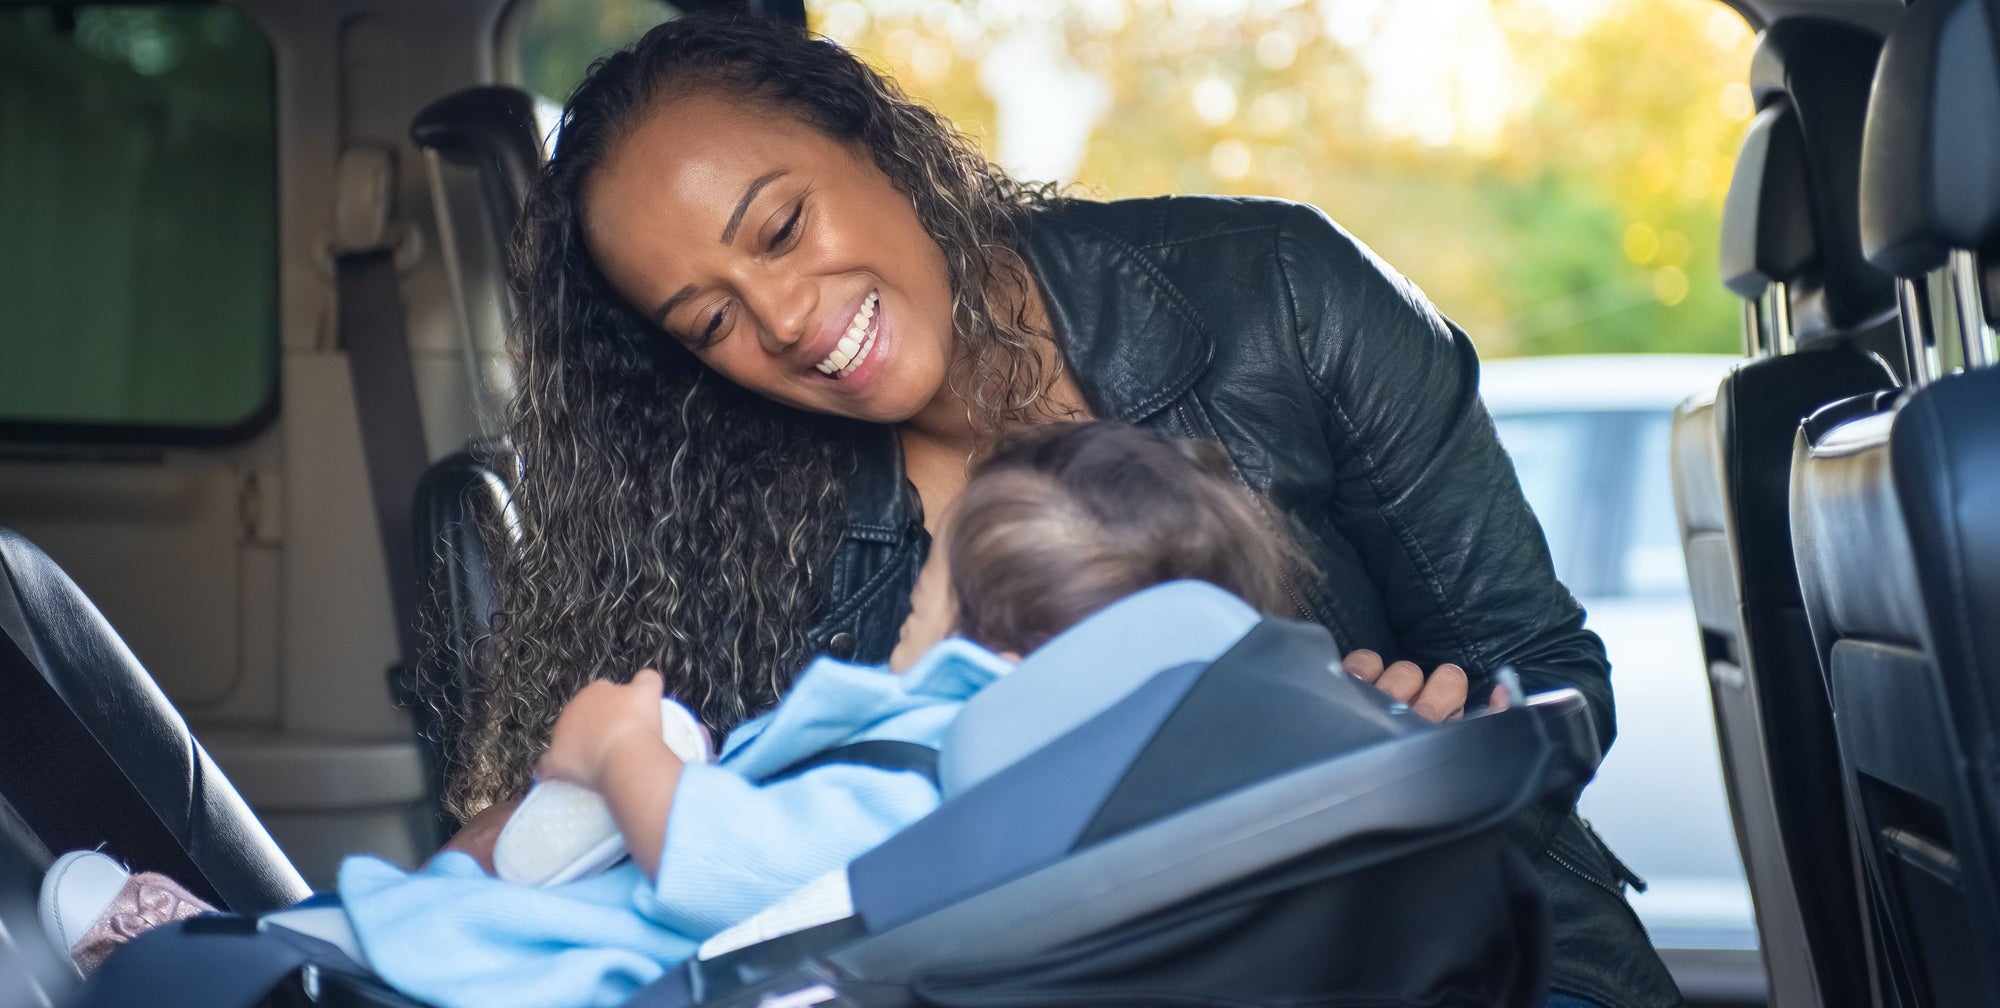 All you need to know about car seats